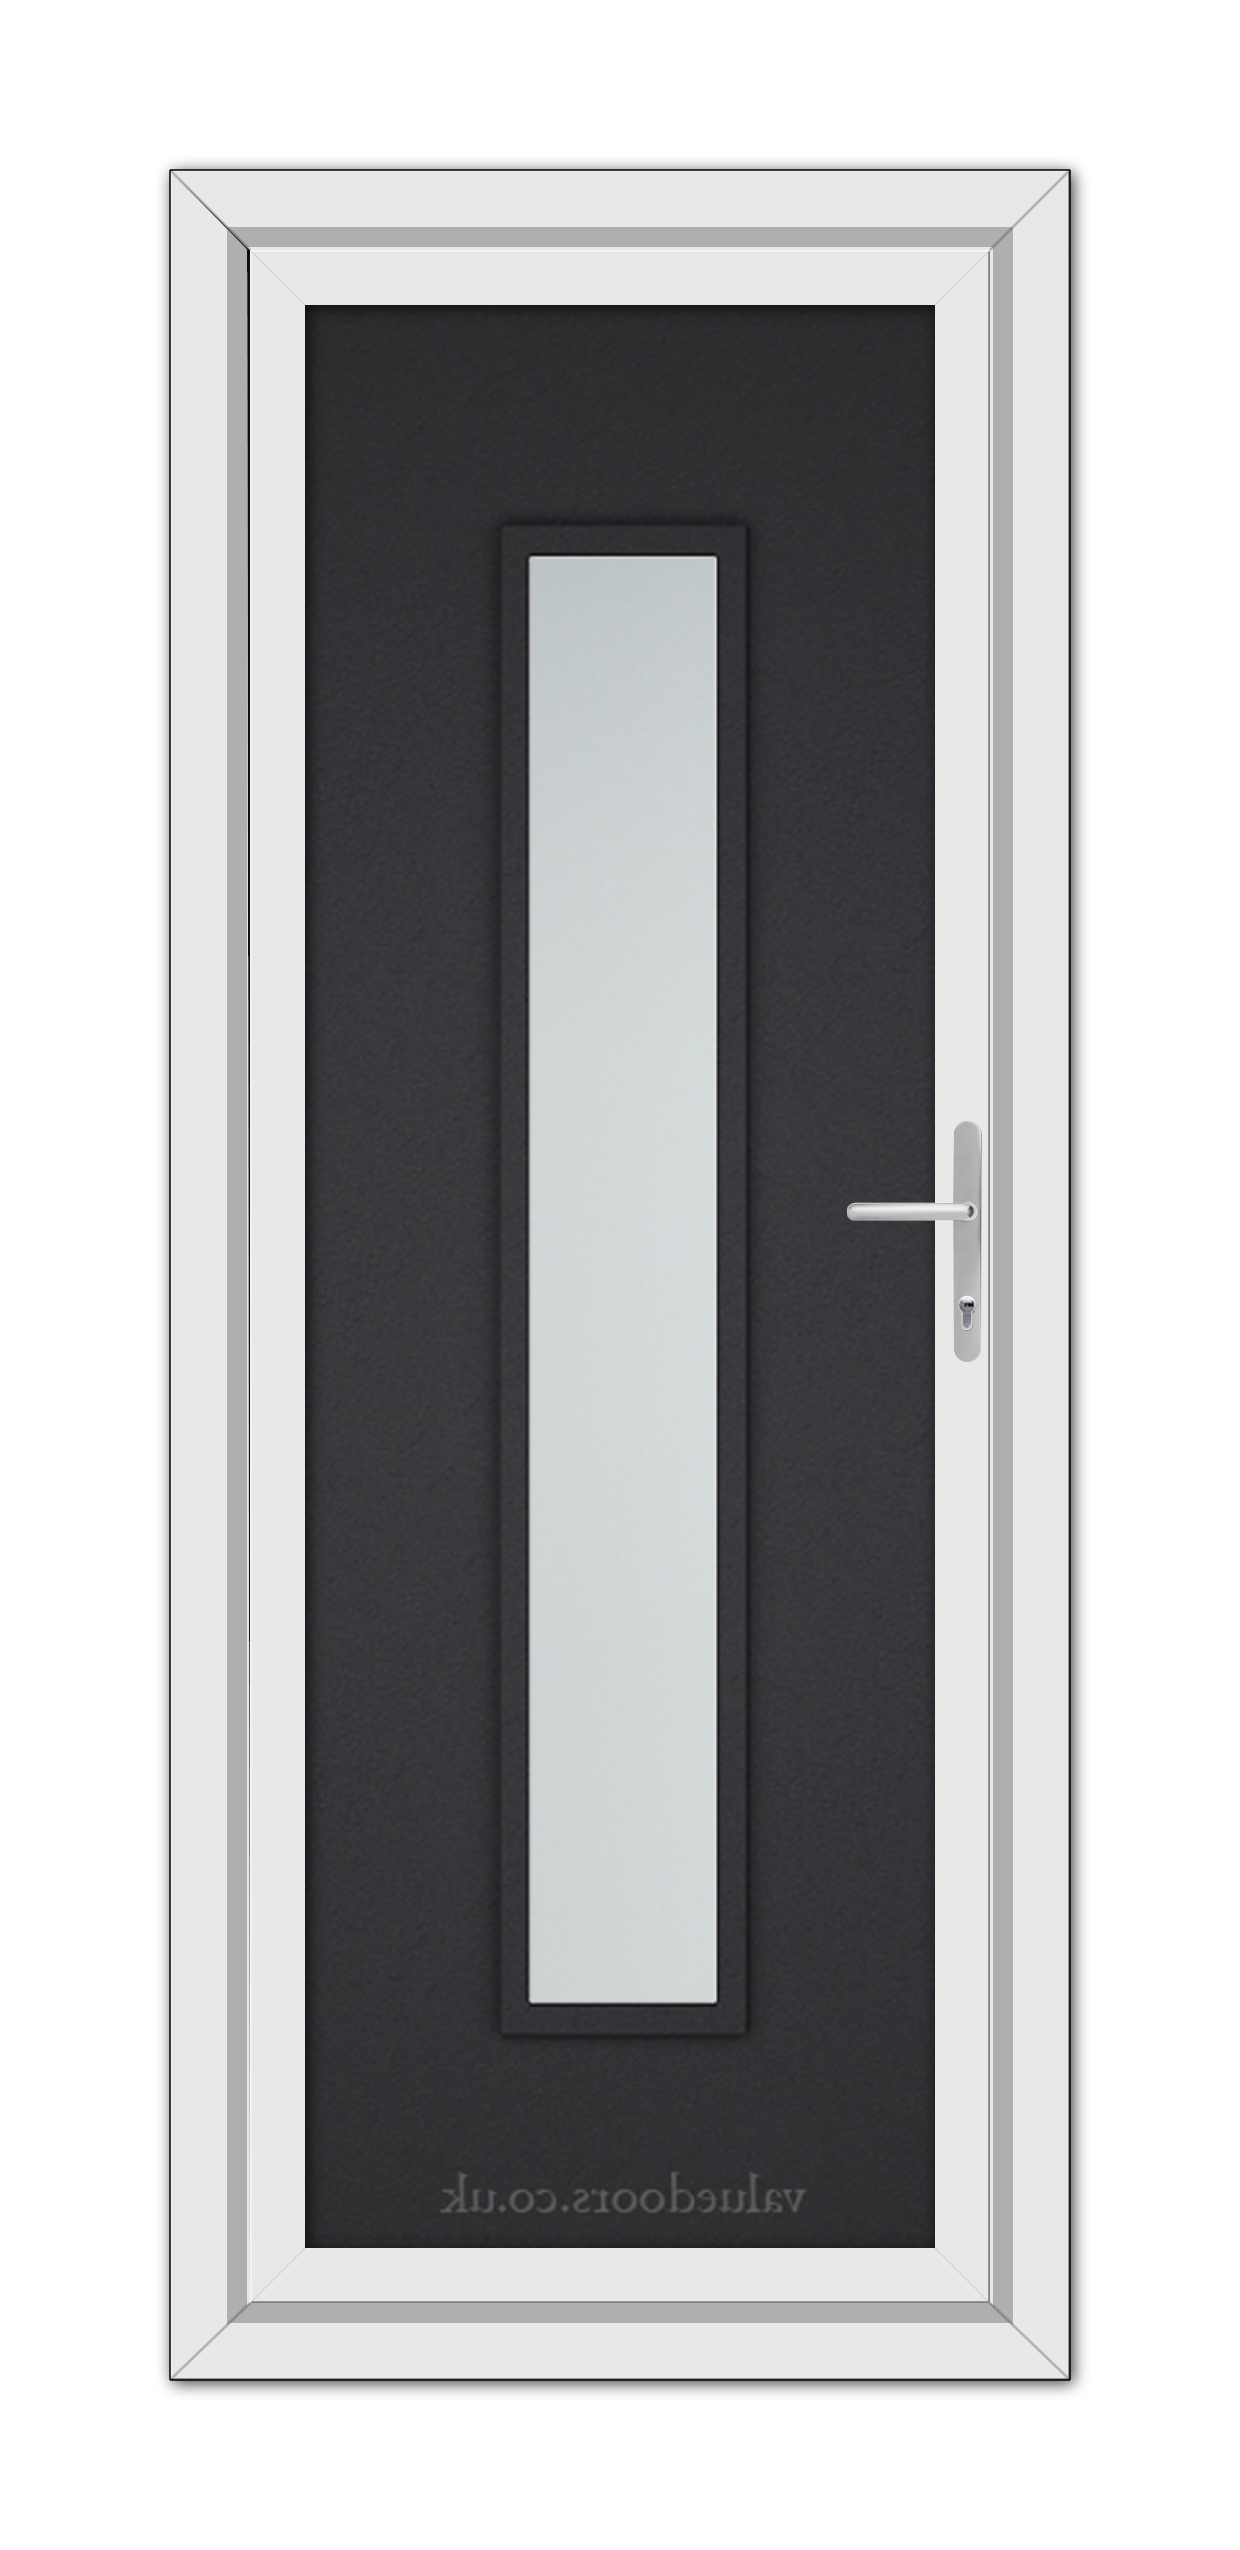 A Black Brown Modern 5101 uPVC Door with a slim glass panel, framed in white, featuring a silver handle on the right side.